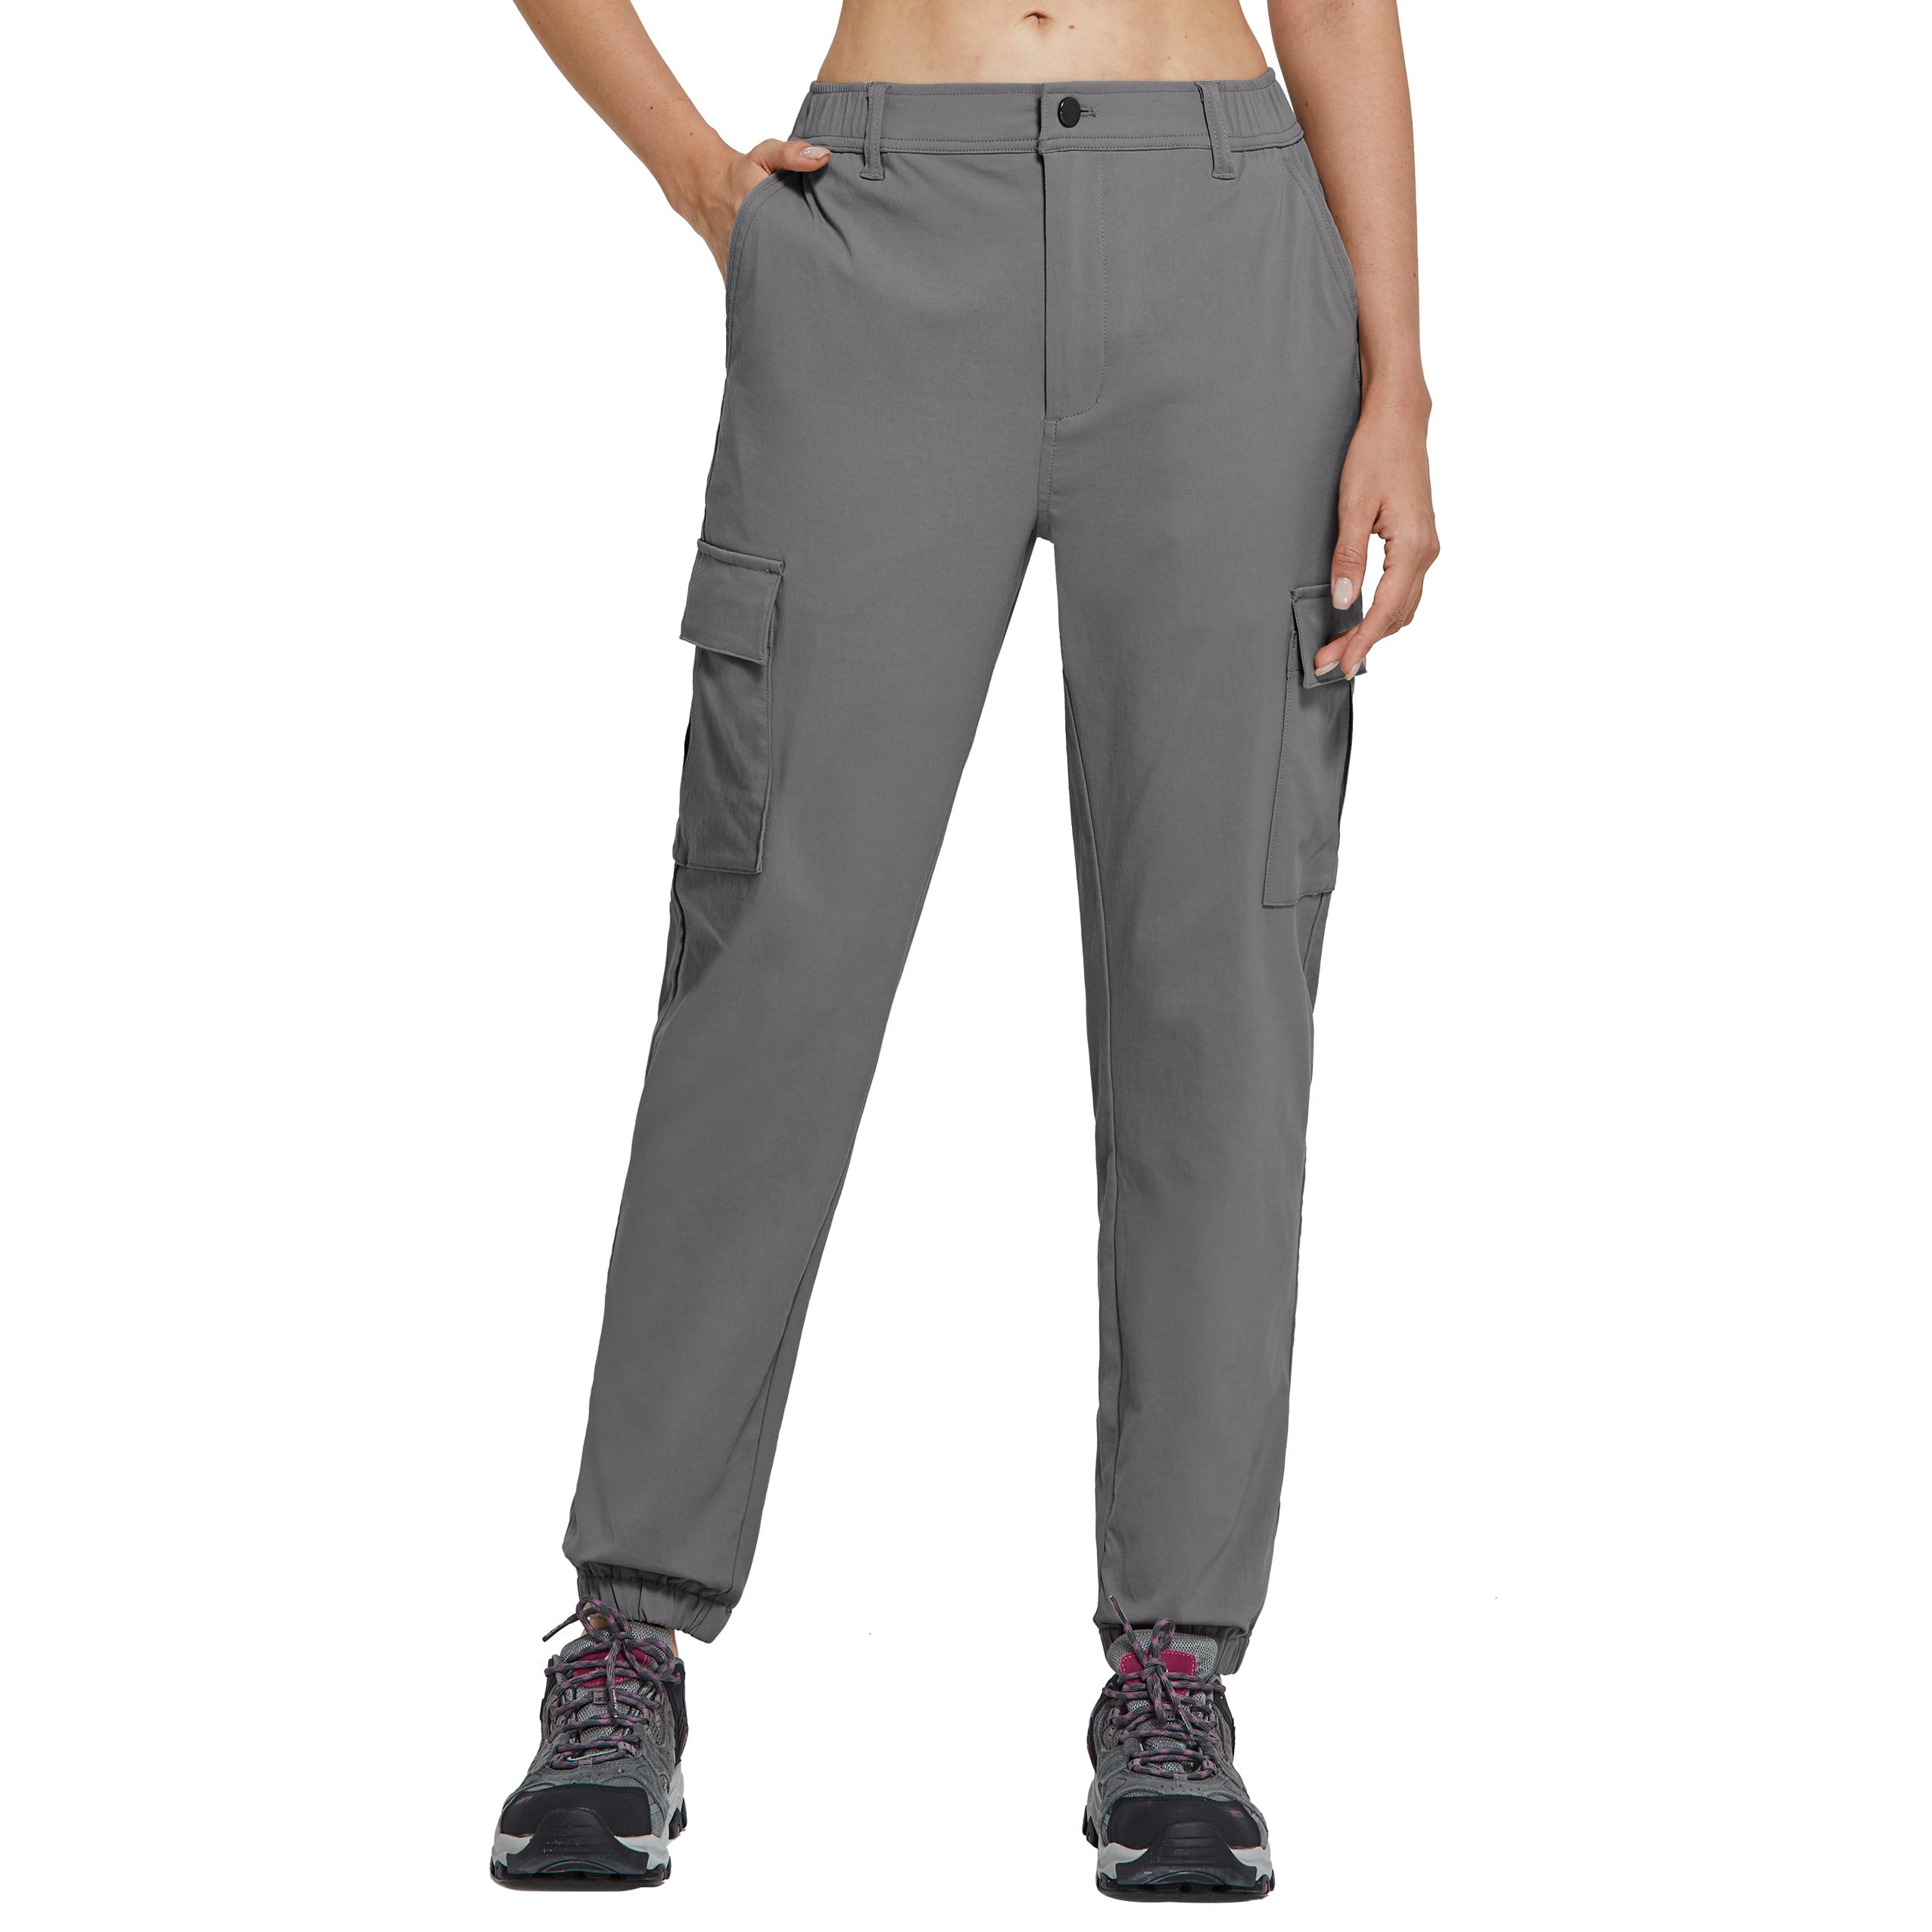 SPECIALMAGIC Women Capris Cargo Pants Running Joggers Hiking Athletic Pants with Pockets 